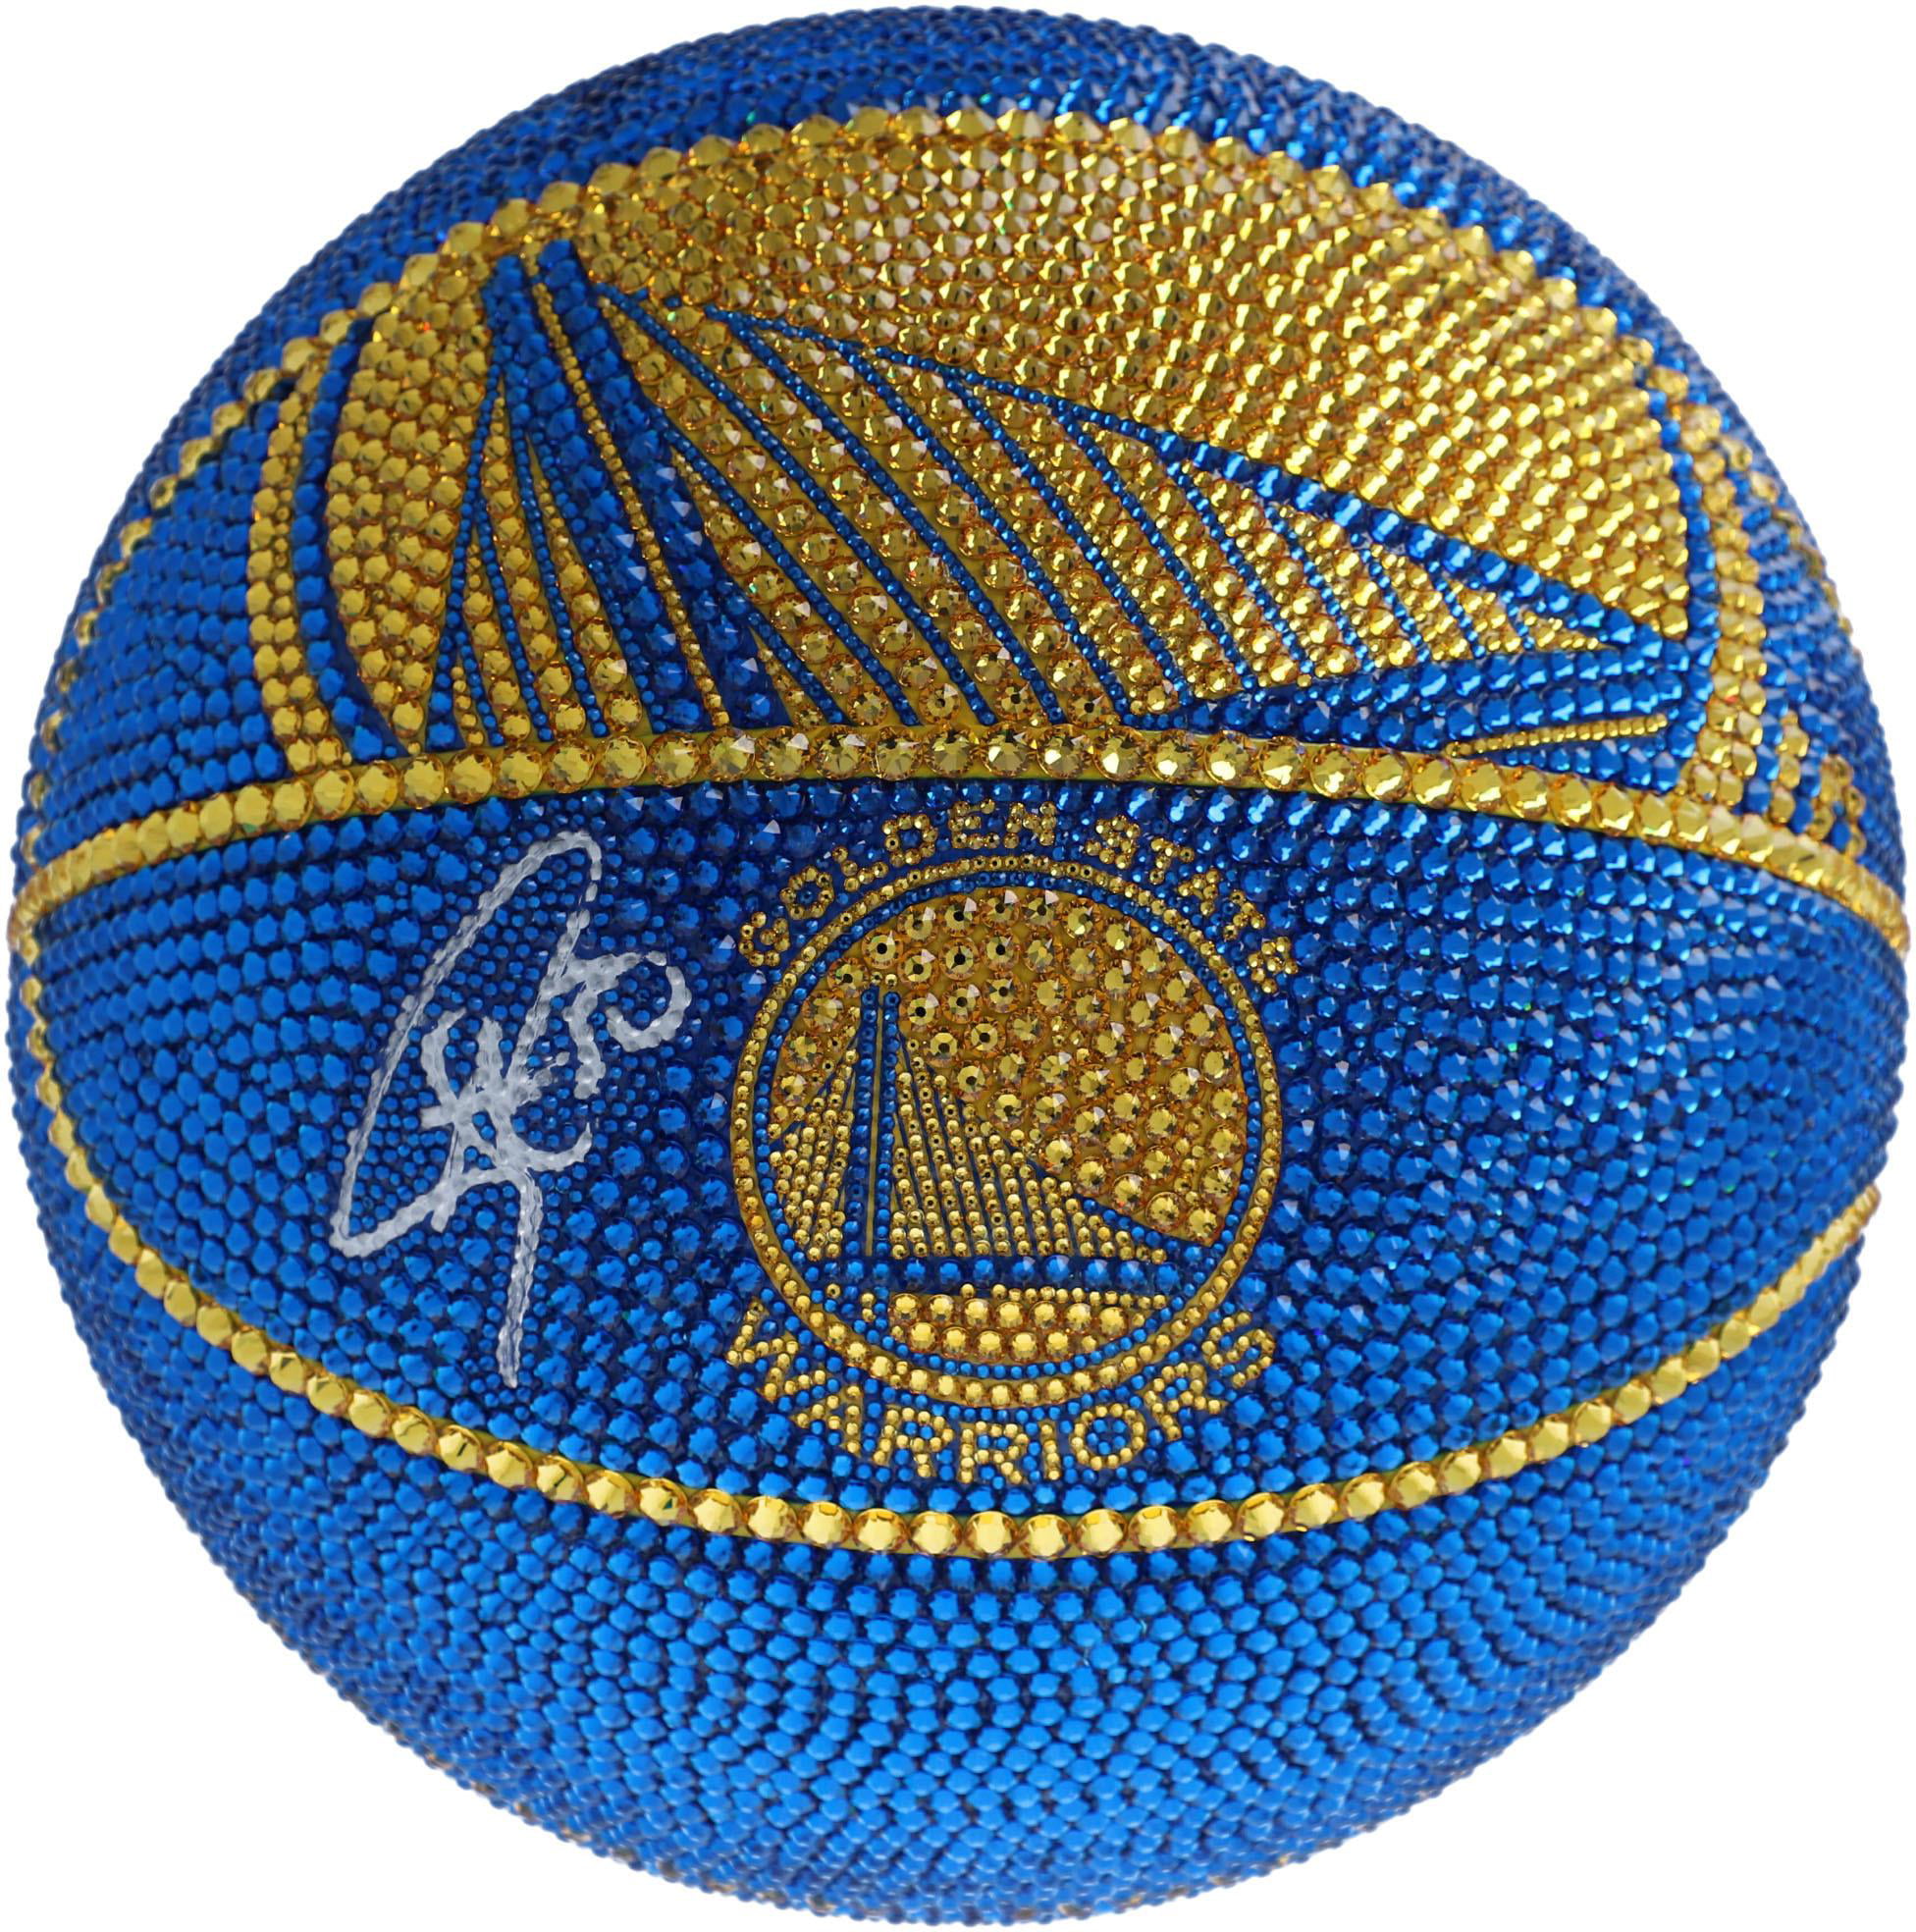 steph curry autographed basketball